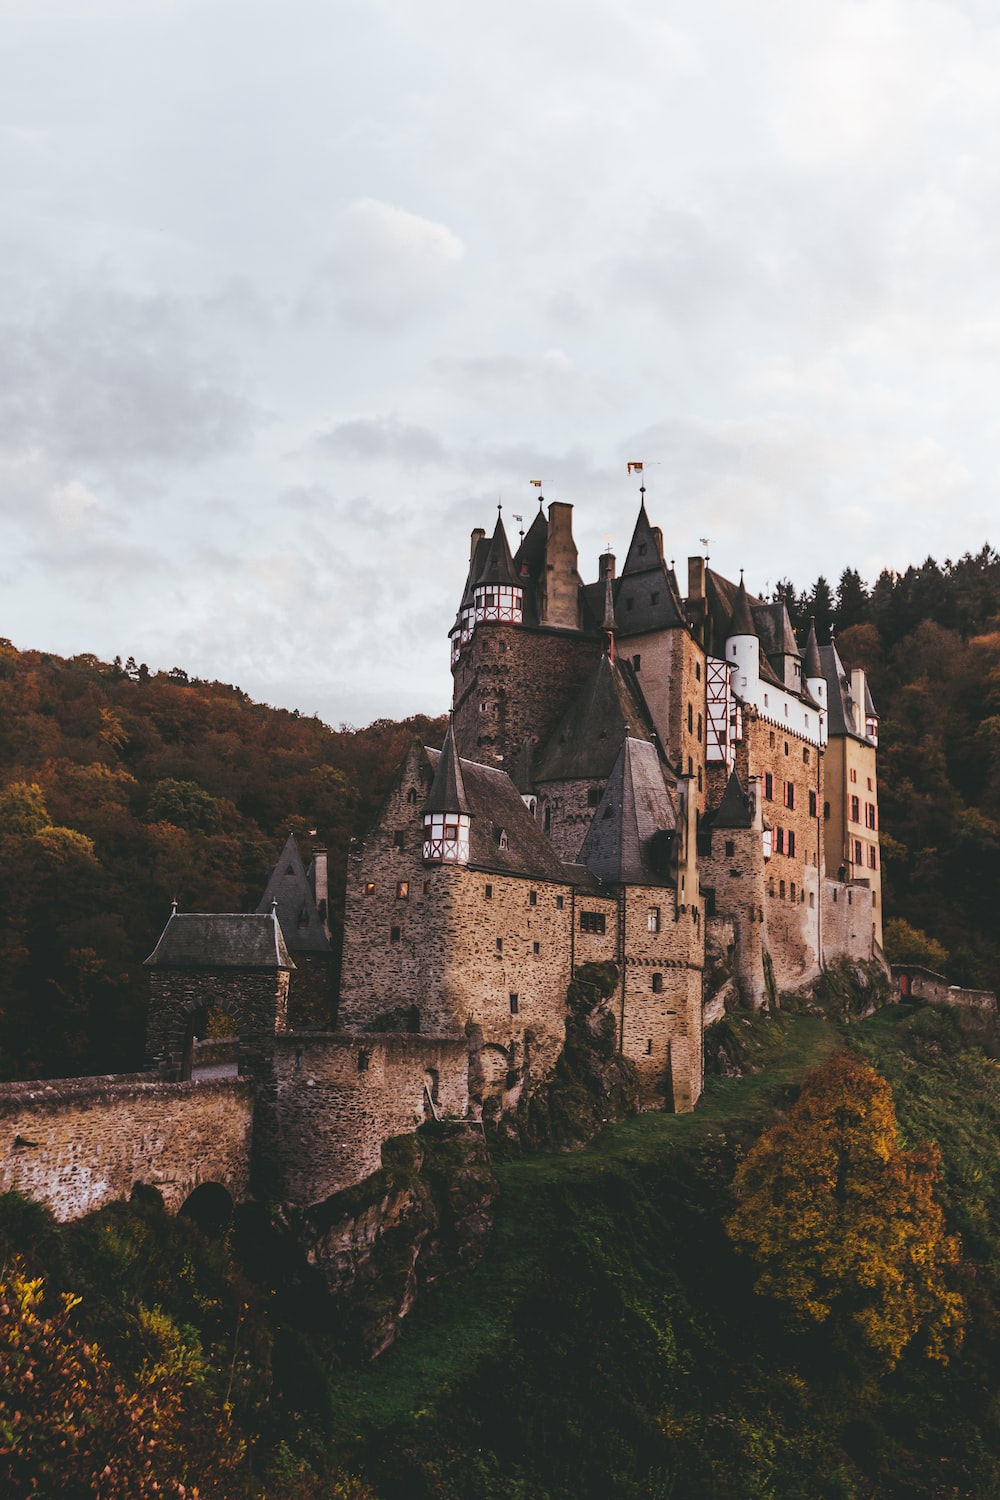 Gothic Castle Wallpapers